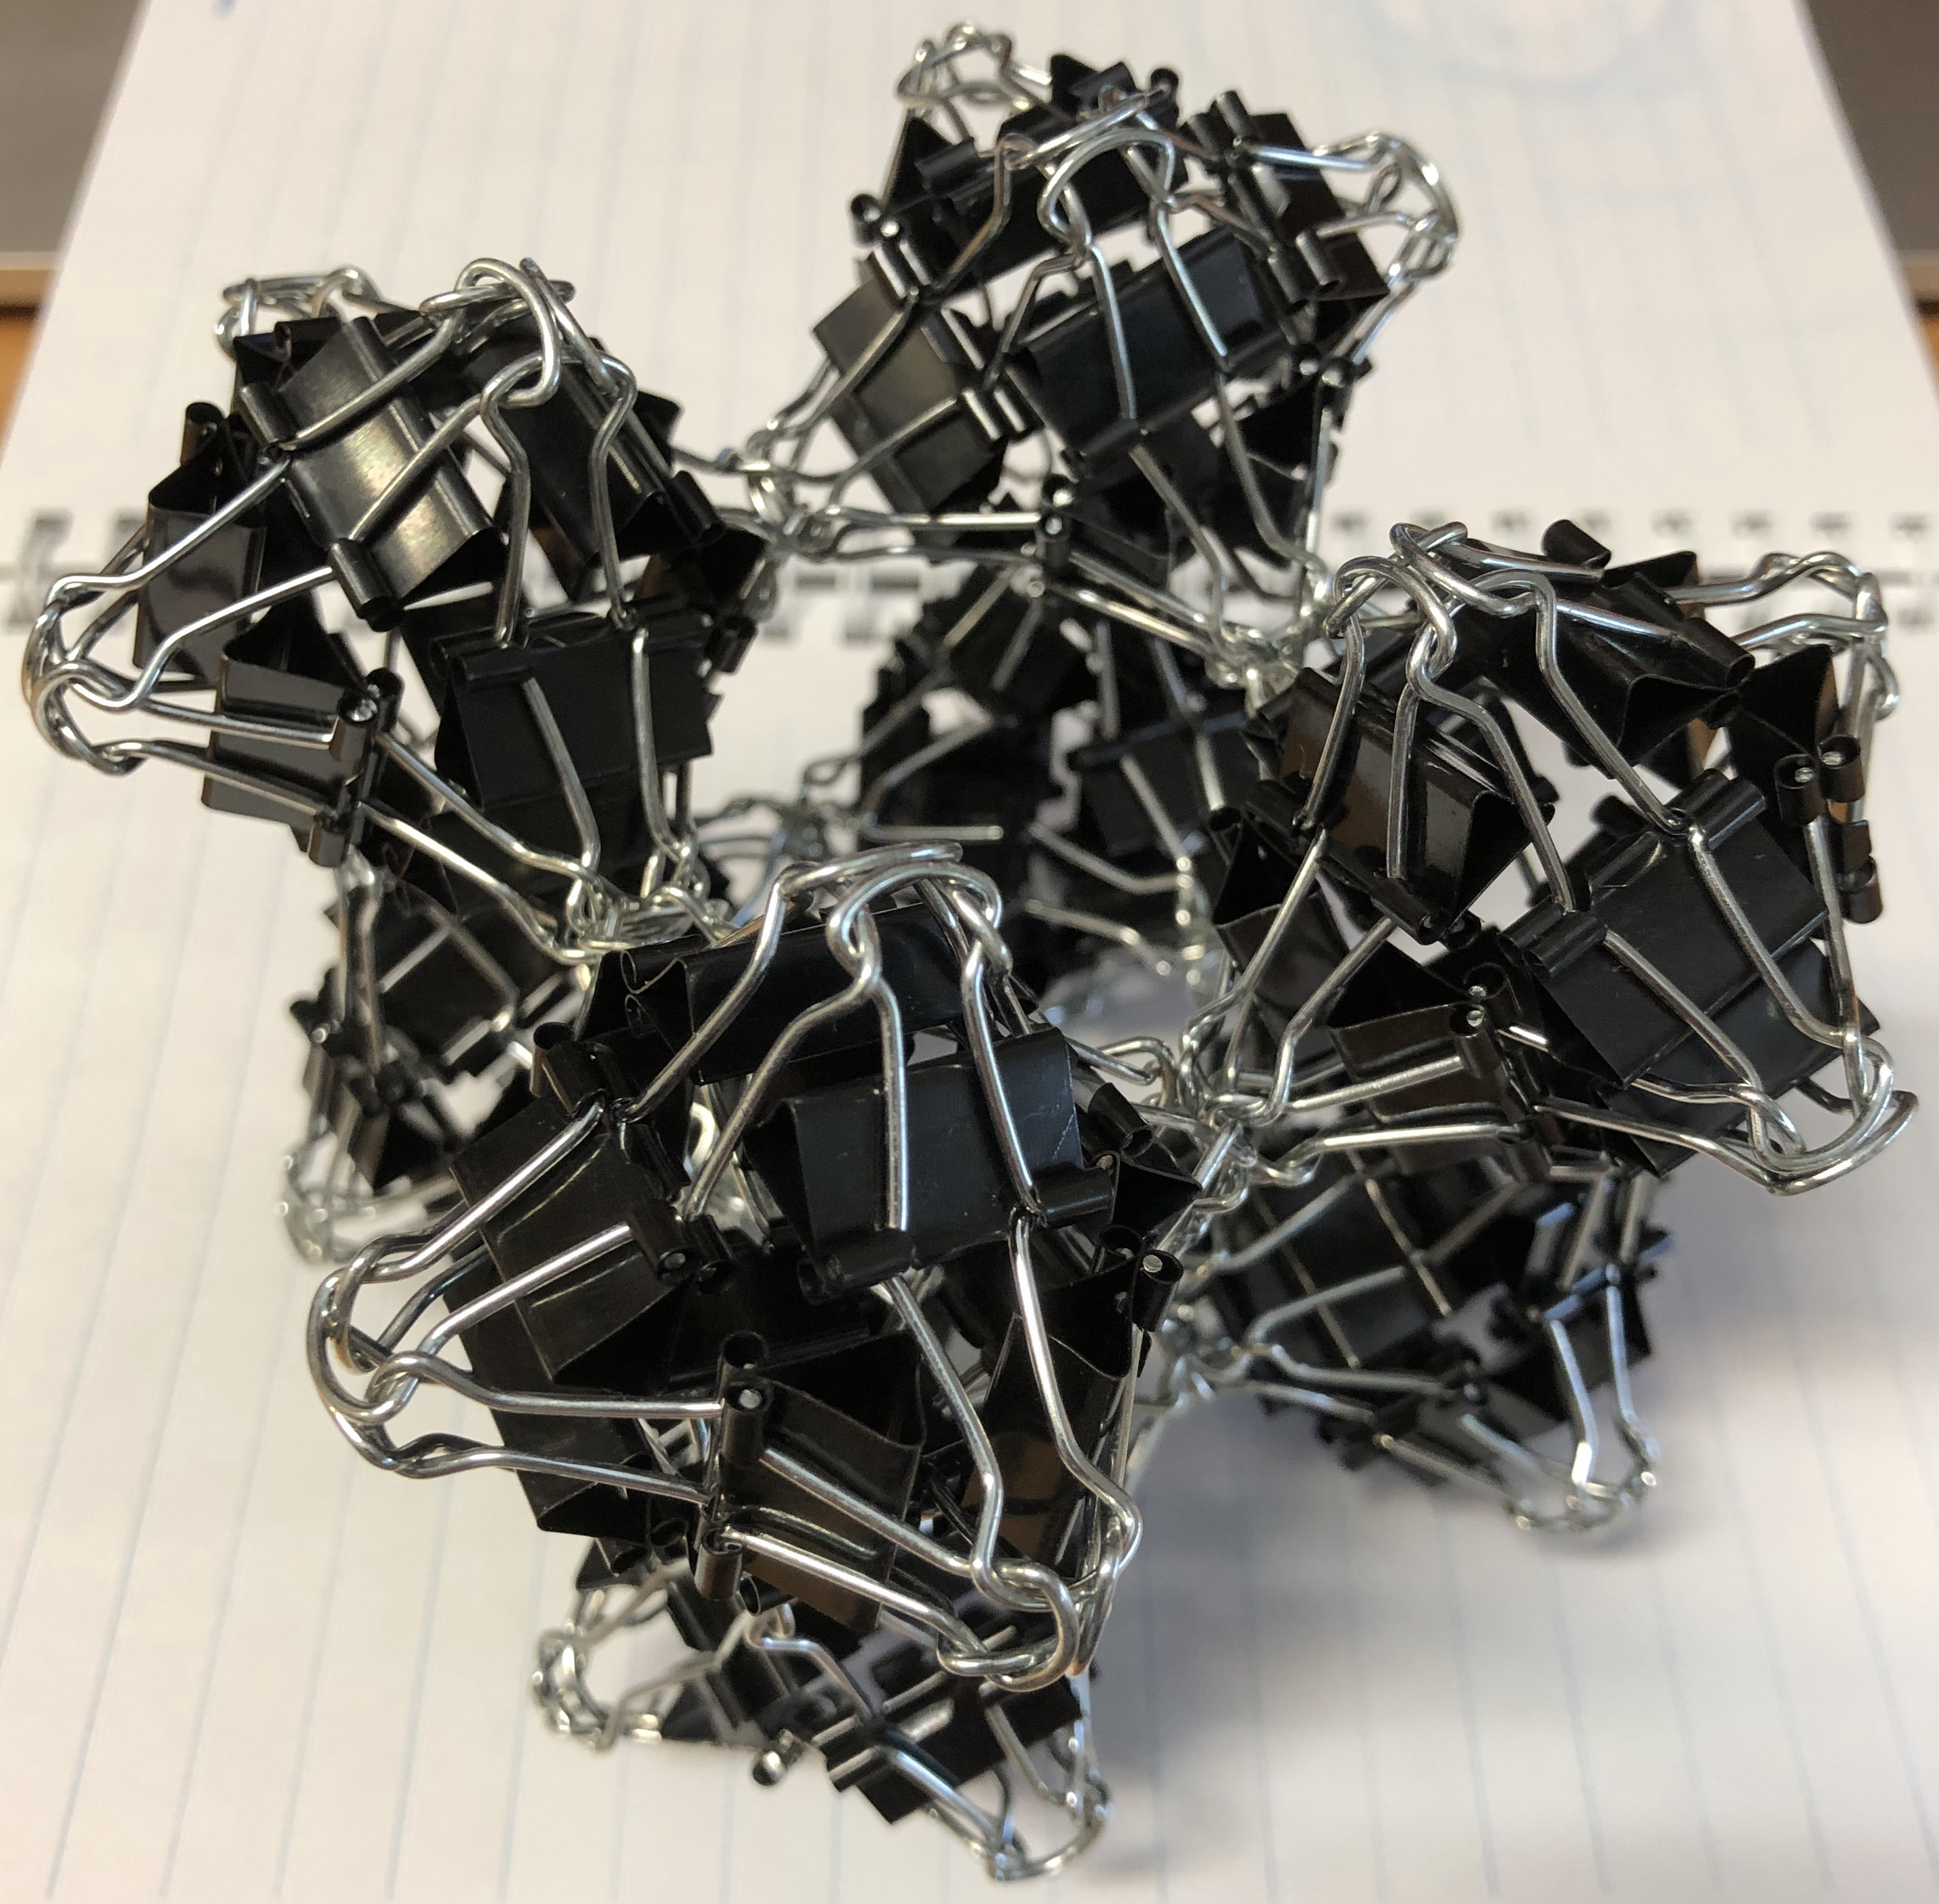 12 clips forming spiky octahedron, 8 of that forming cube